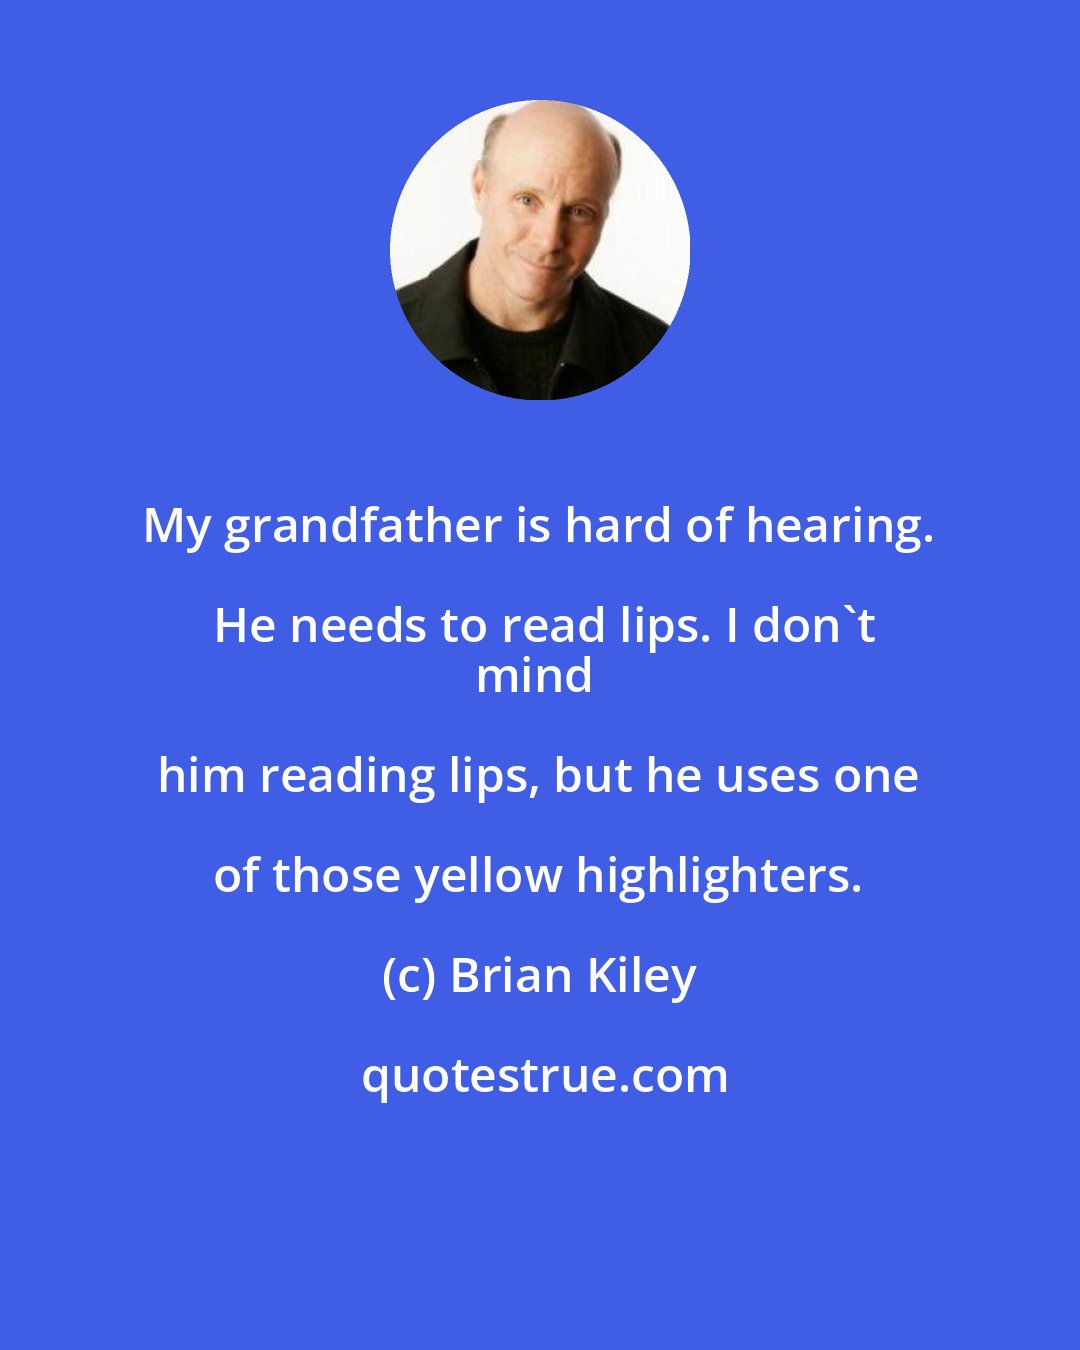 Brian Kiley: My grandfather is hard of hearing. He needs to read lips. I don't
mind him reading lips, but he uses one of those yellow highlighters.